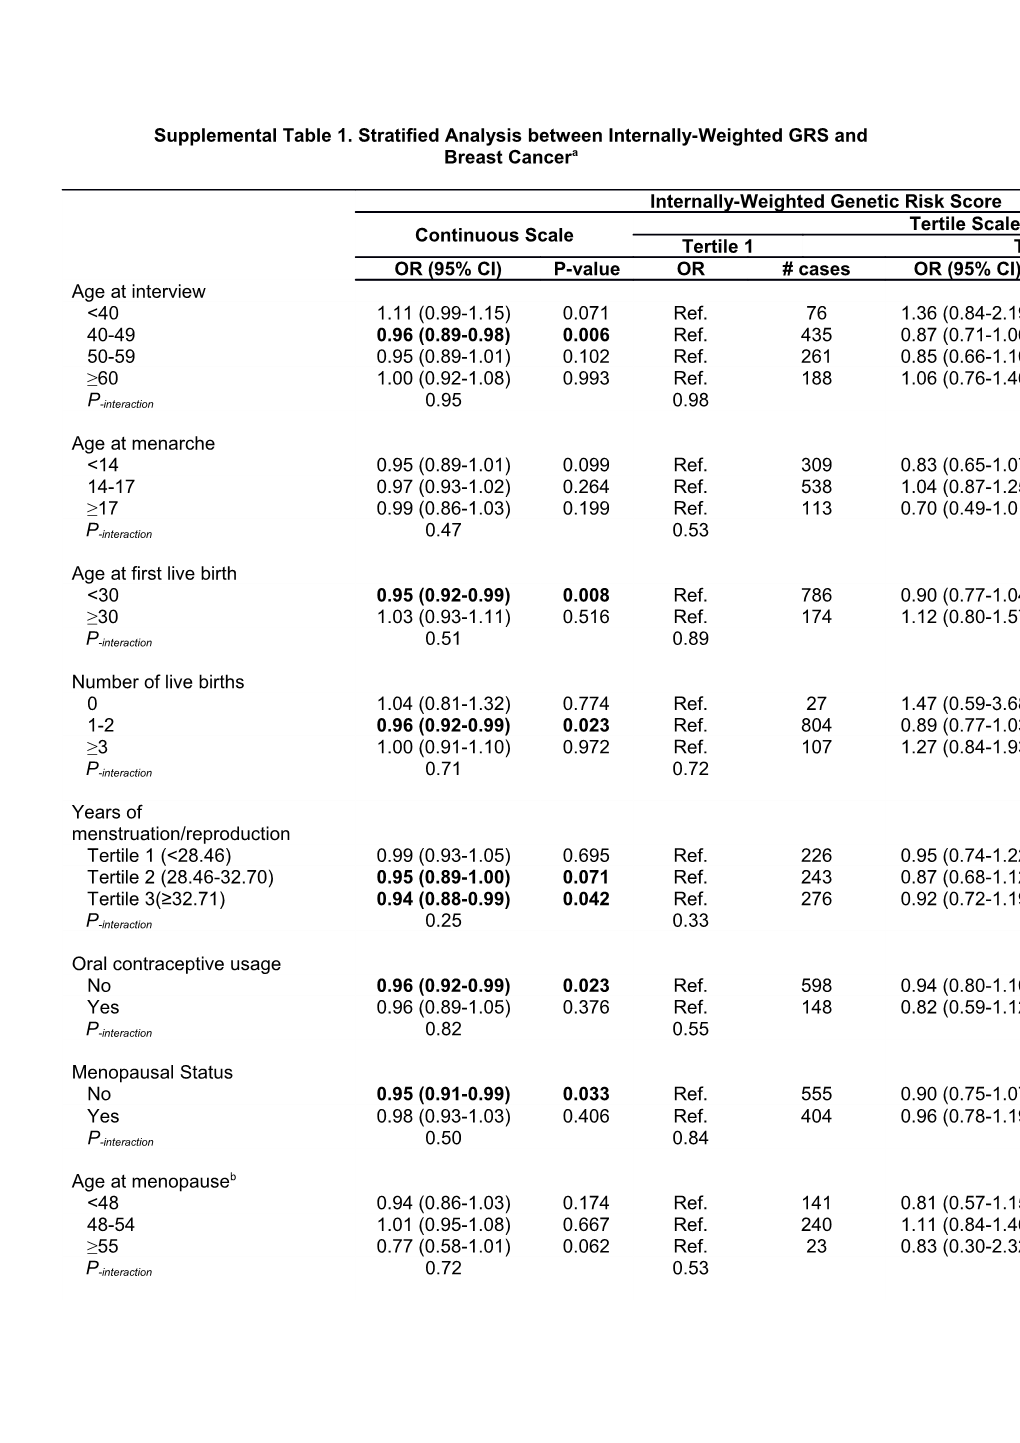 Supplemental Table 1. Stratified Analysis Between Internally-Weighted GRS and Breast Cancera